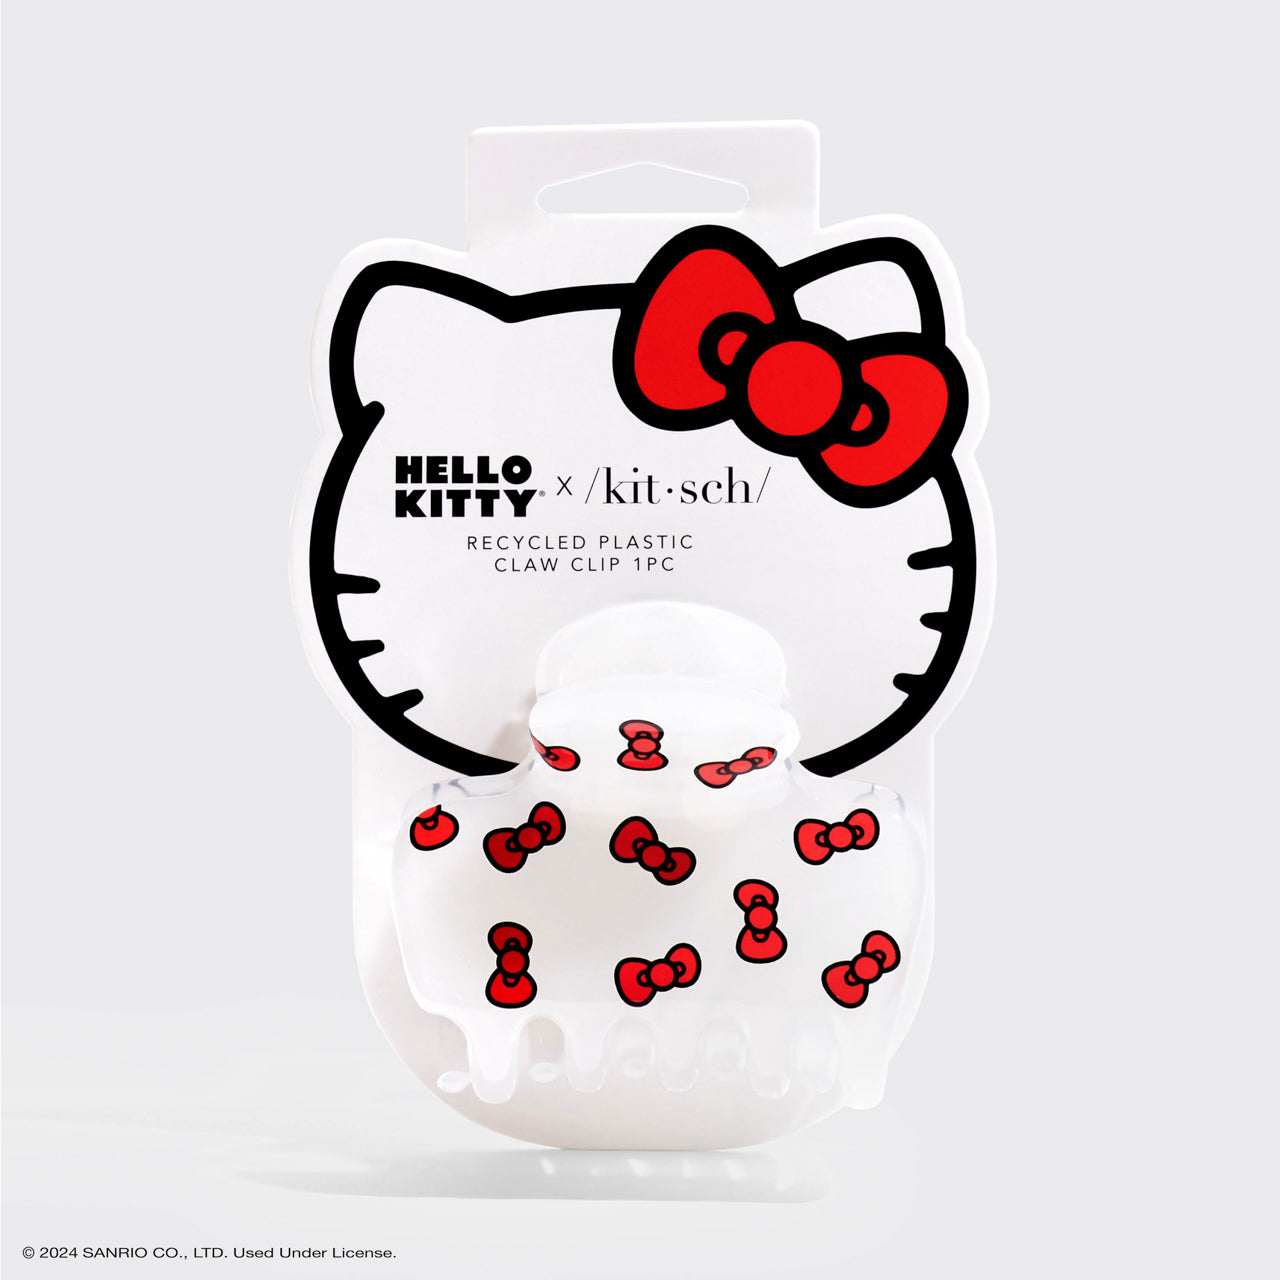 Hello Kitty x Kitsch Recycled Plastic Puffy Claw Clip 1pc - Hello Kitty Bows